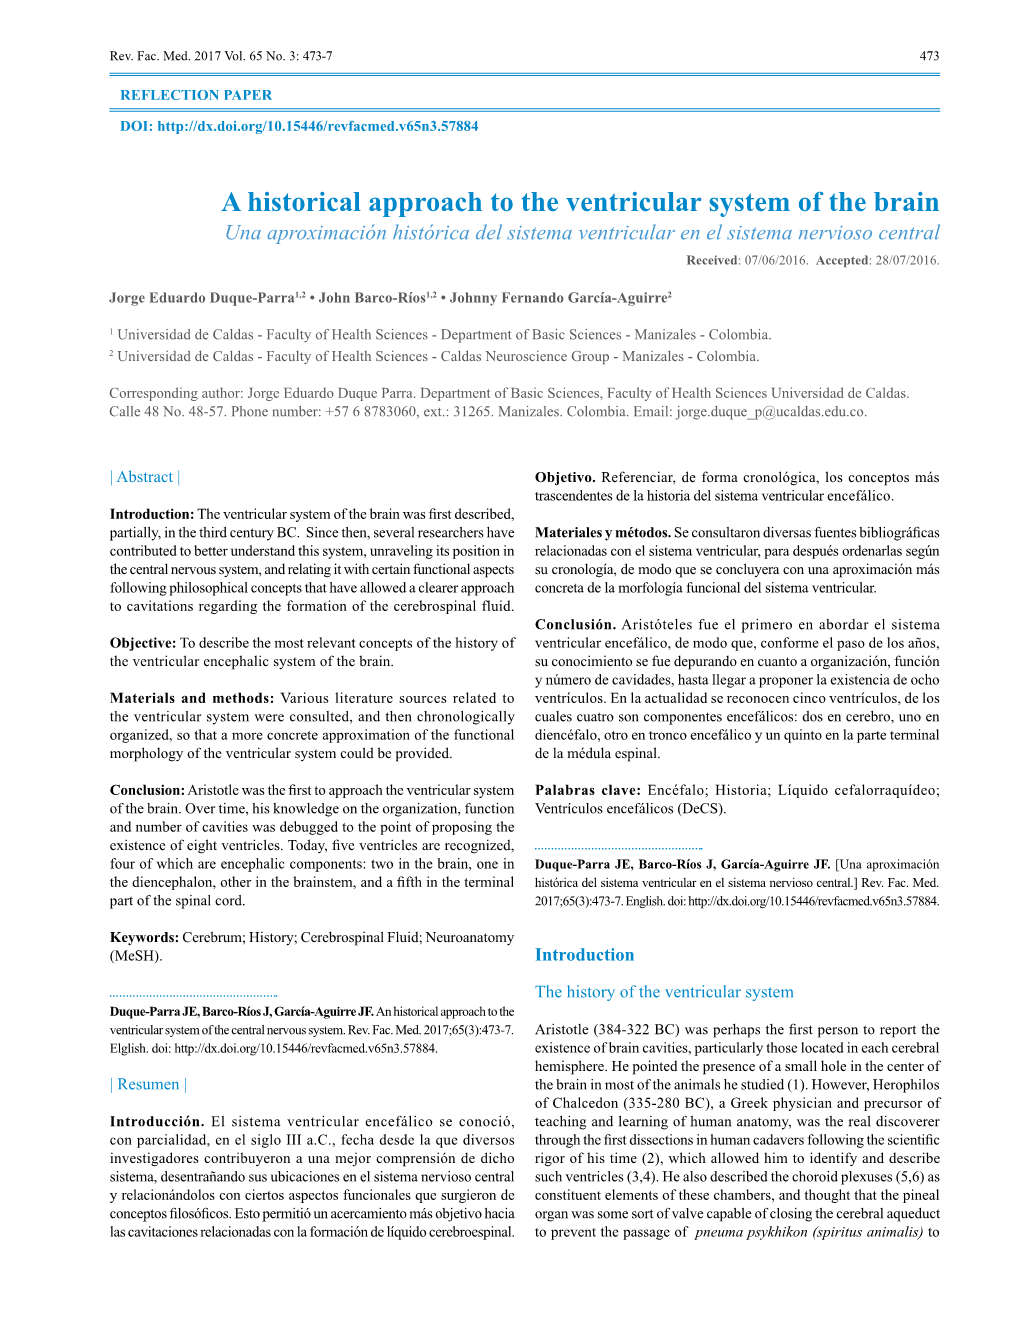 A Historical Approach to the Ventricular System of the Brain Una Aproximación Histórica Del Sistema Ventricular En El Sistema Nervioso Central Received: 07/06/2016